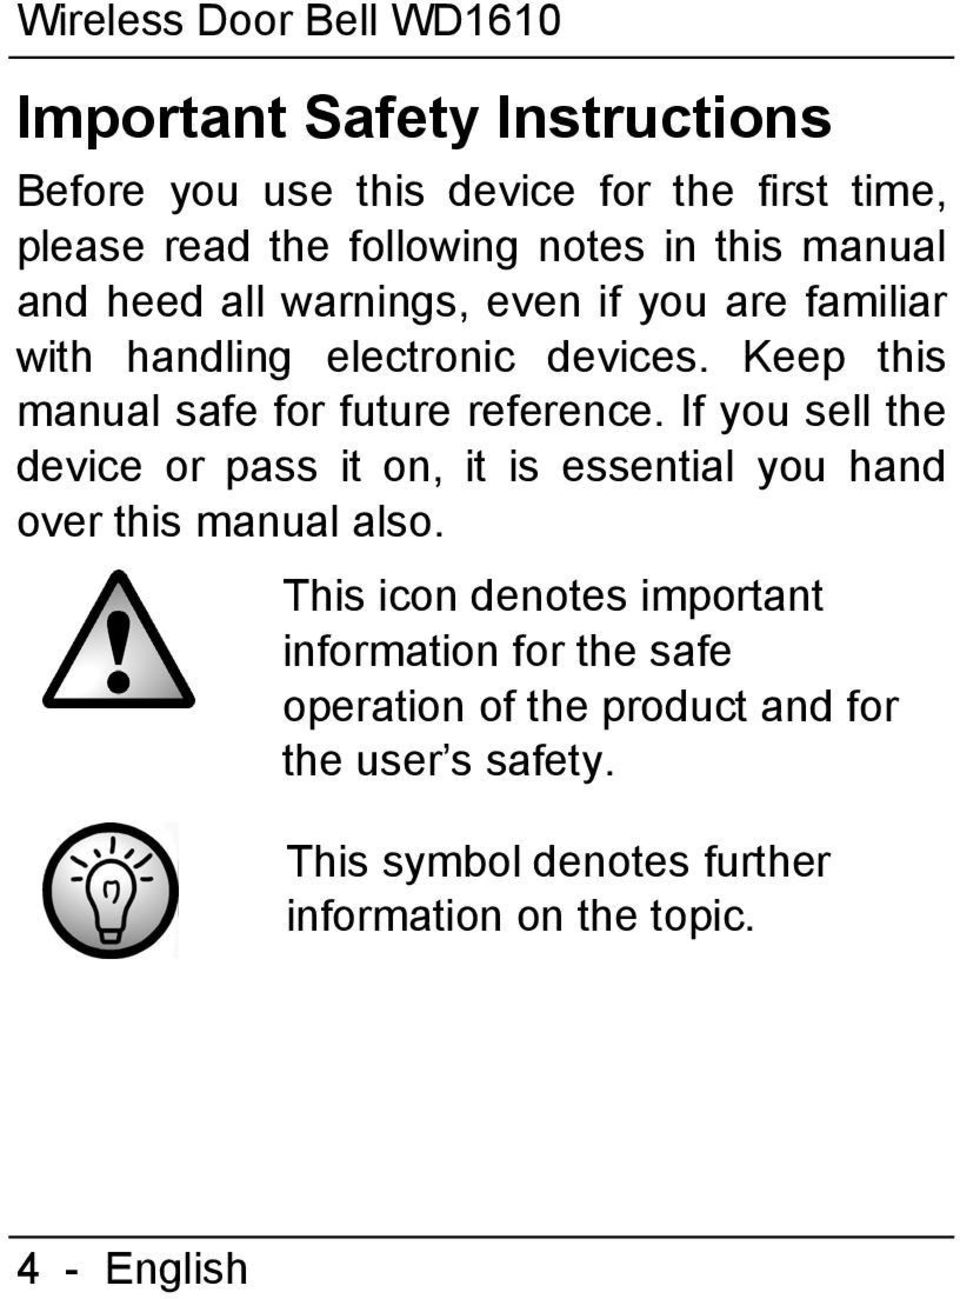 Keep this manual safe for future reference. If you sell the device or pass it on, it is essential you hand over this manual also.